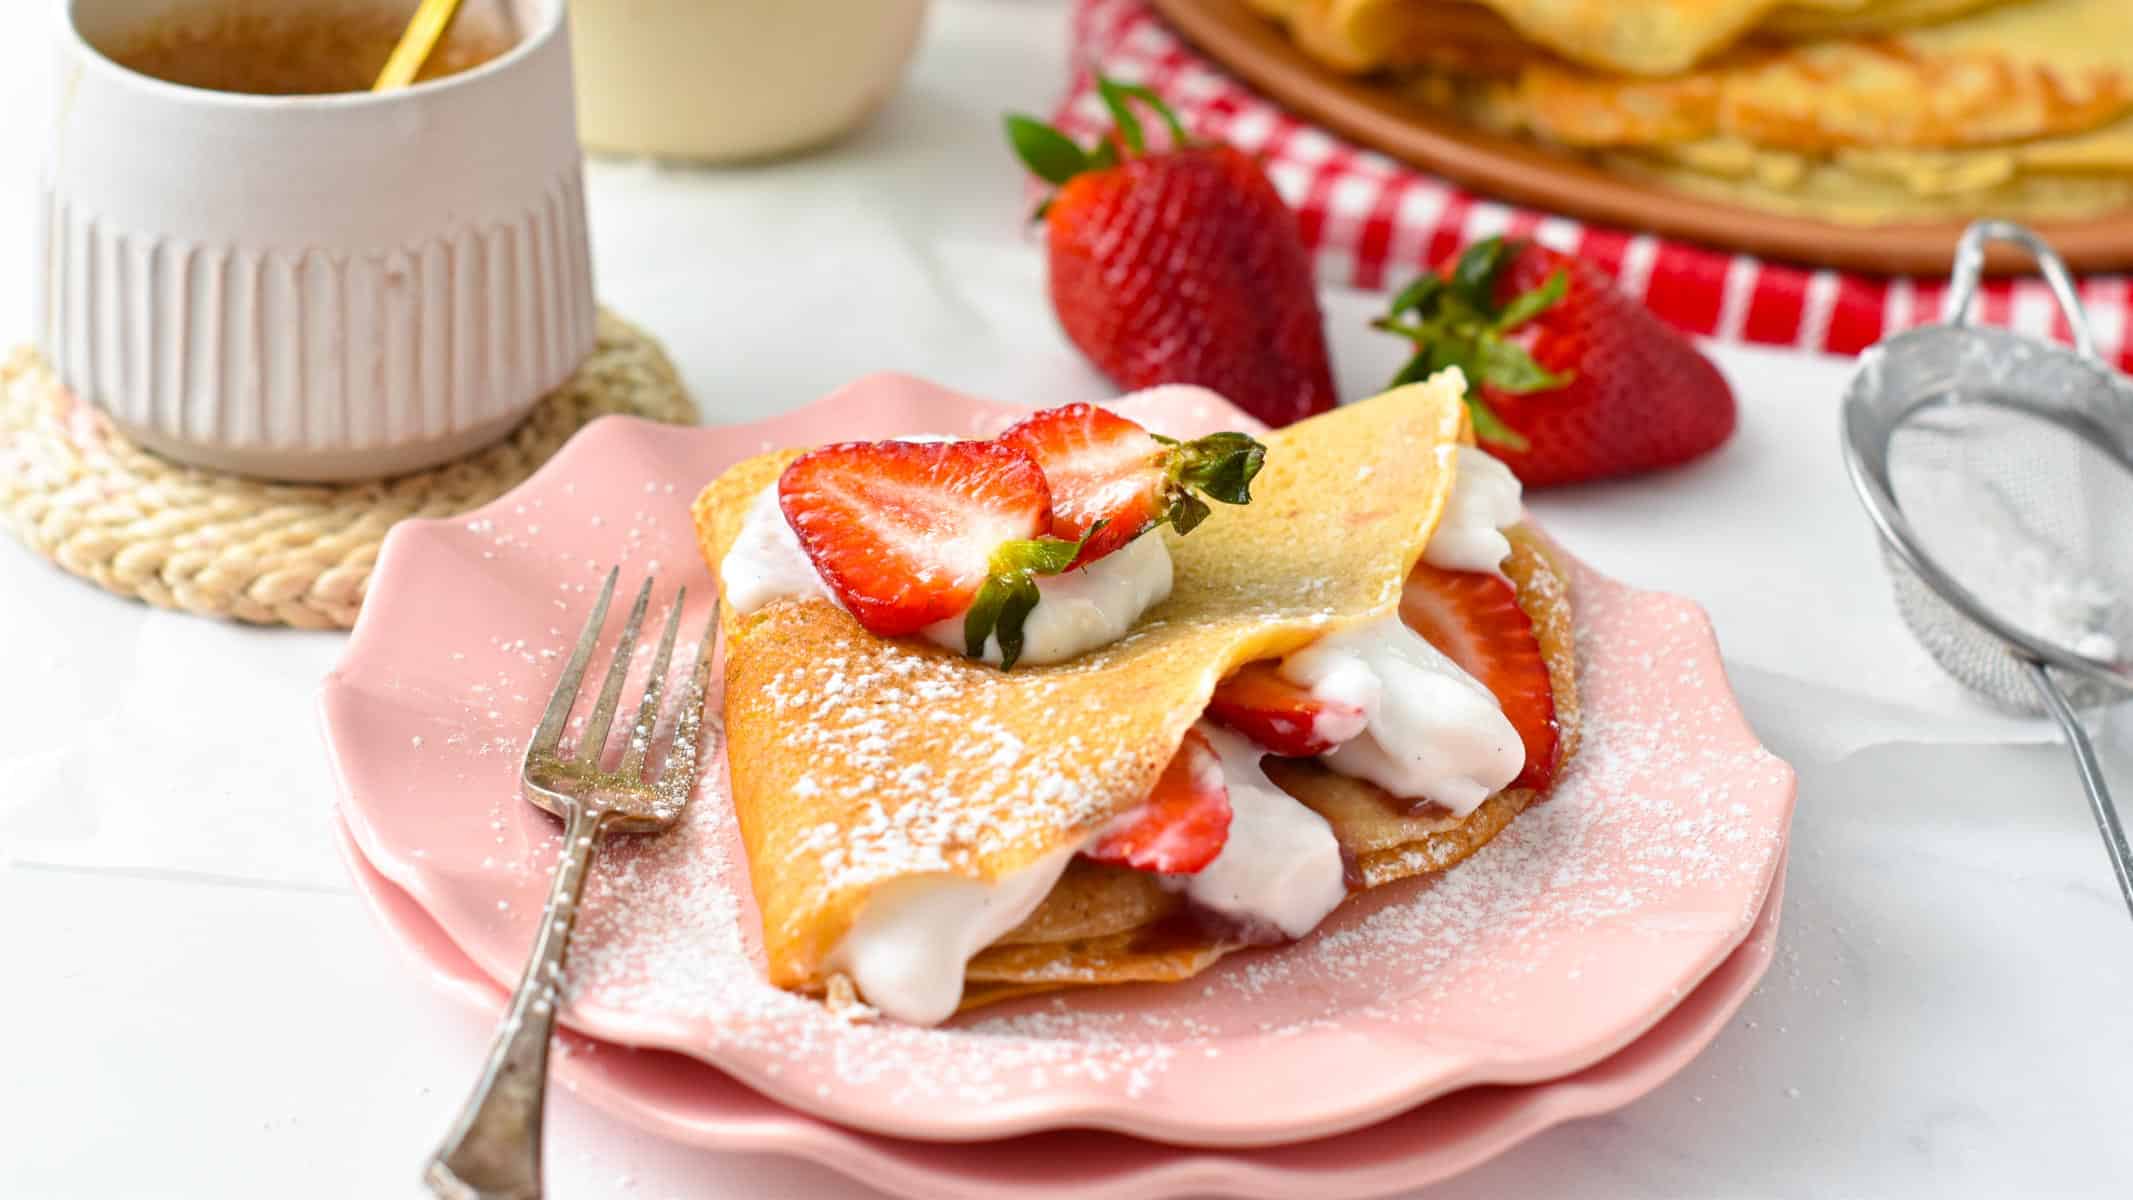 a vegan french crepe filled with strawberries, dairy-free whipped cream and lots of vegan crepes in the background